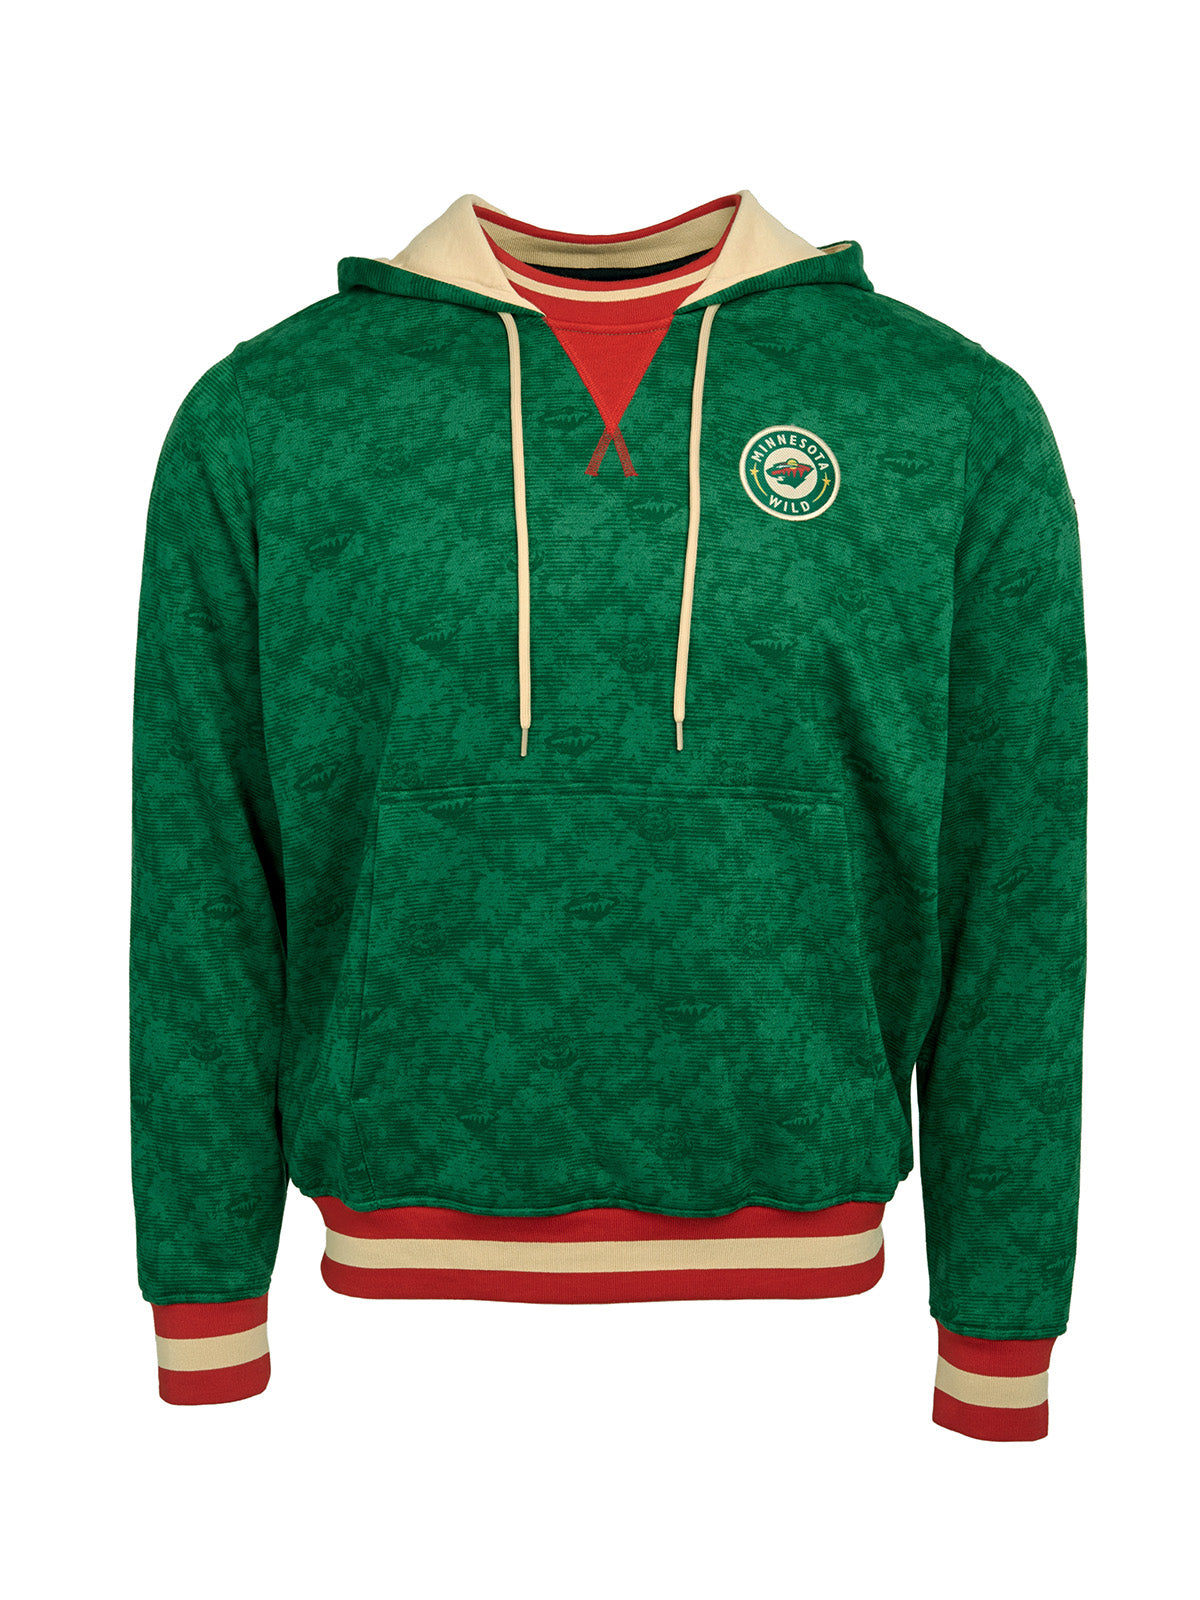 Minnesota Wild Hoodie - Show your team spirit, with the iconic team logo patch on the front left chest, and proudly display your Minnesota Wild support in their team colors with this NHL hockey hoodie.